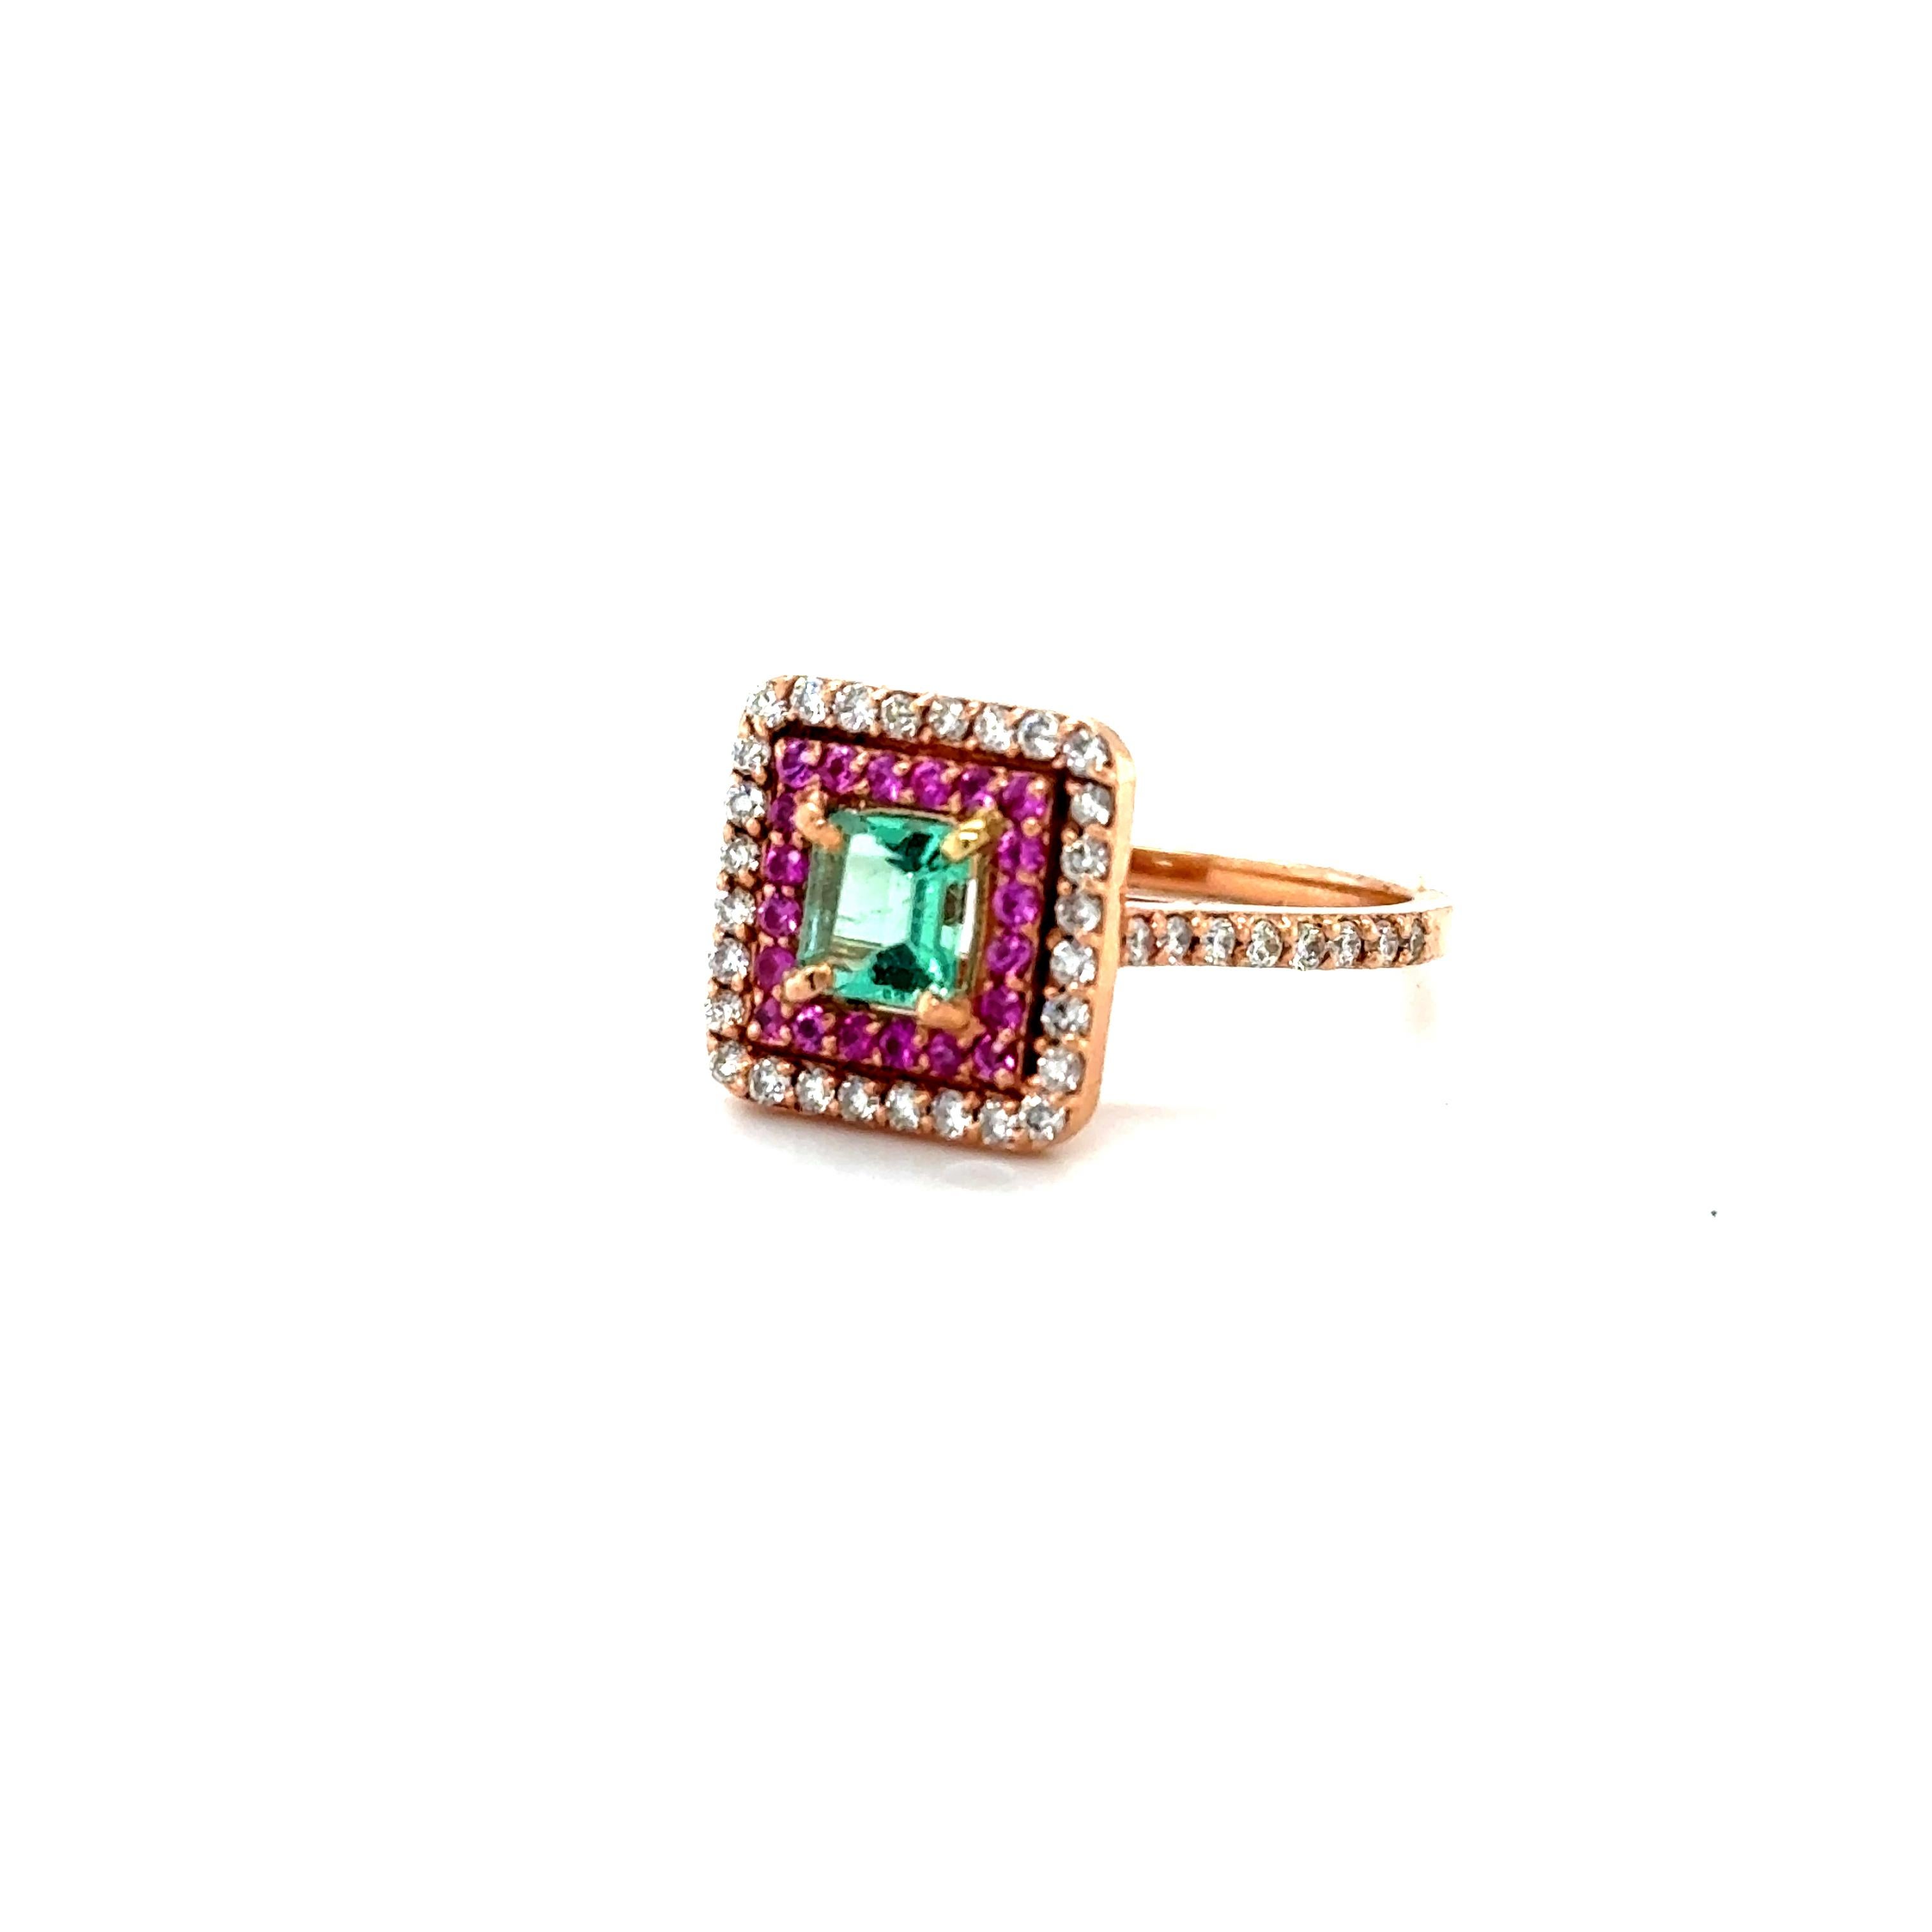 1.30 Carat Cushion Cut Pink Sapphire Diamond Rose Gold Bridal Ring

Simply the most elegant and beautiful Emerald, Pink Sapphire and Diamond Engagement or Wedding Ring!  The center cushion cut Emerald is 0.64 carats and is surrounded by a halo of 20